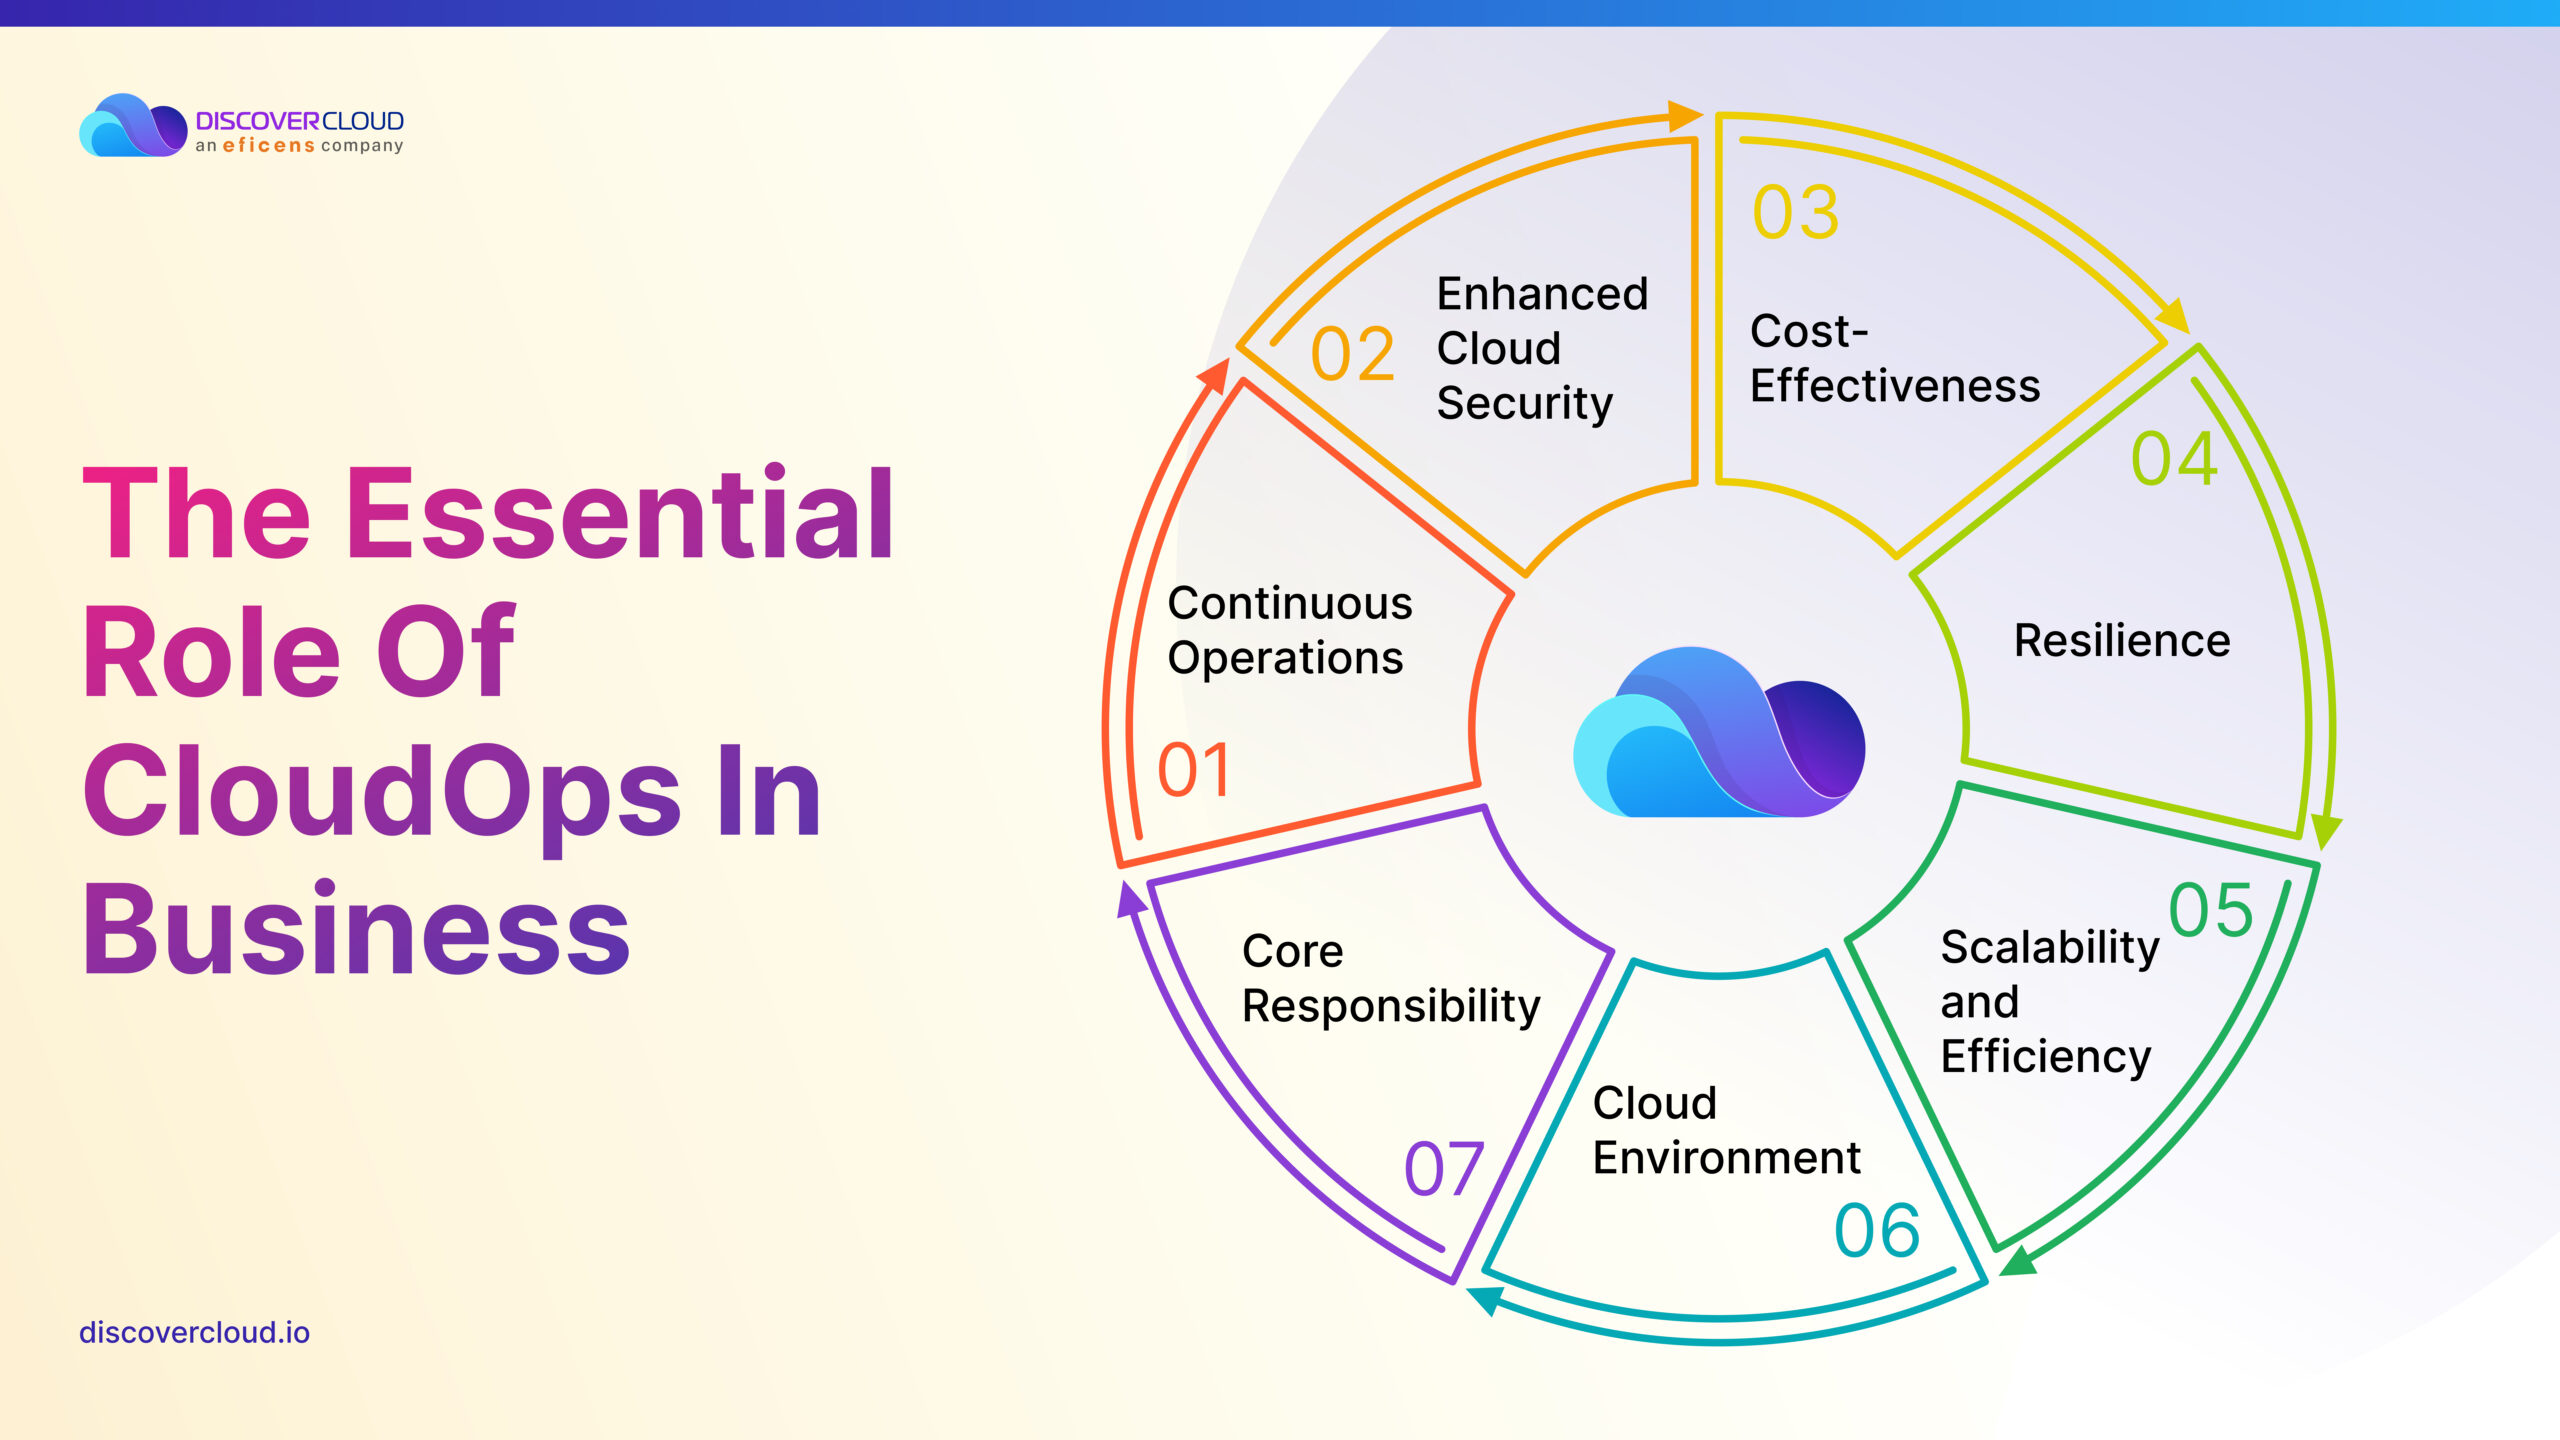 The Essential Role of CloudOps in Business